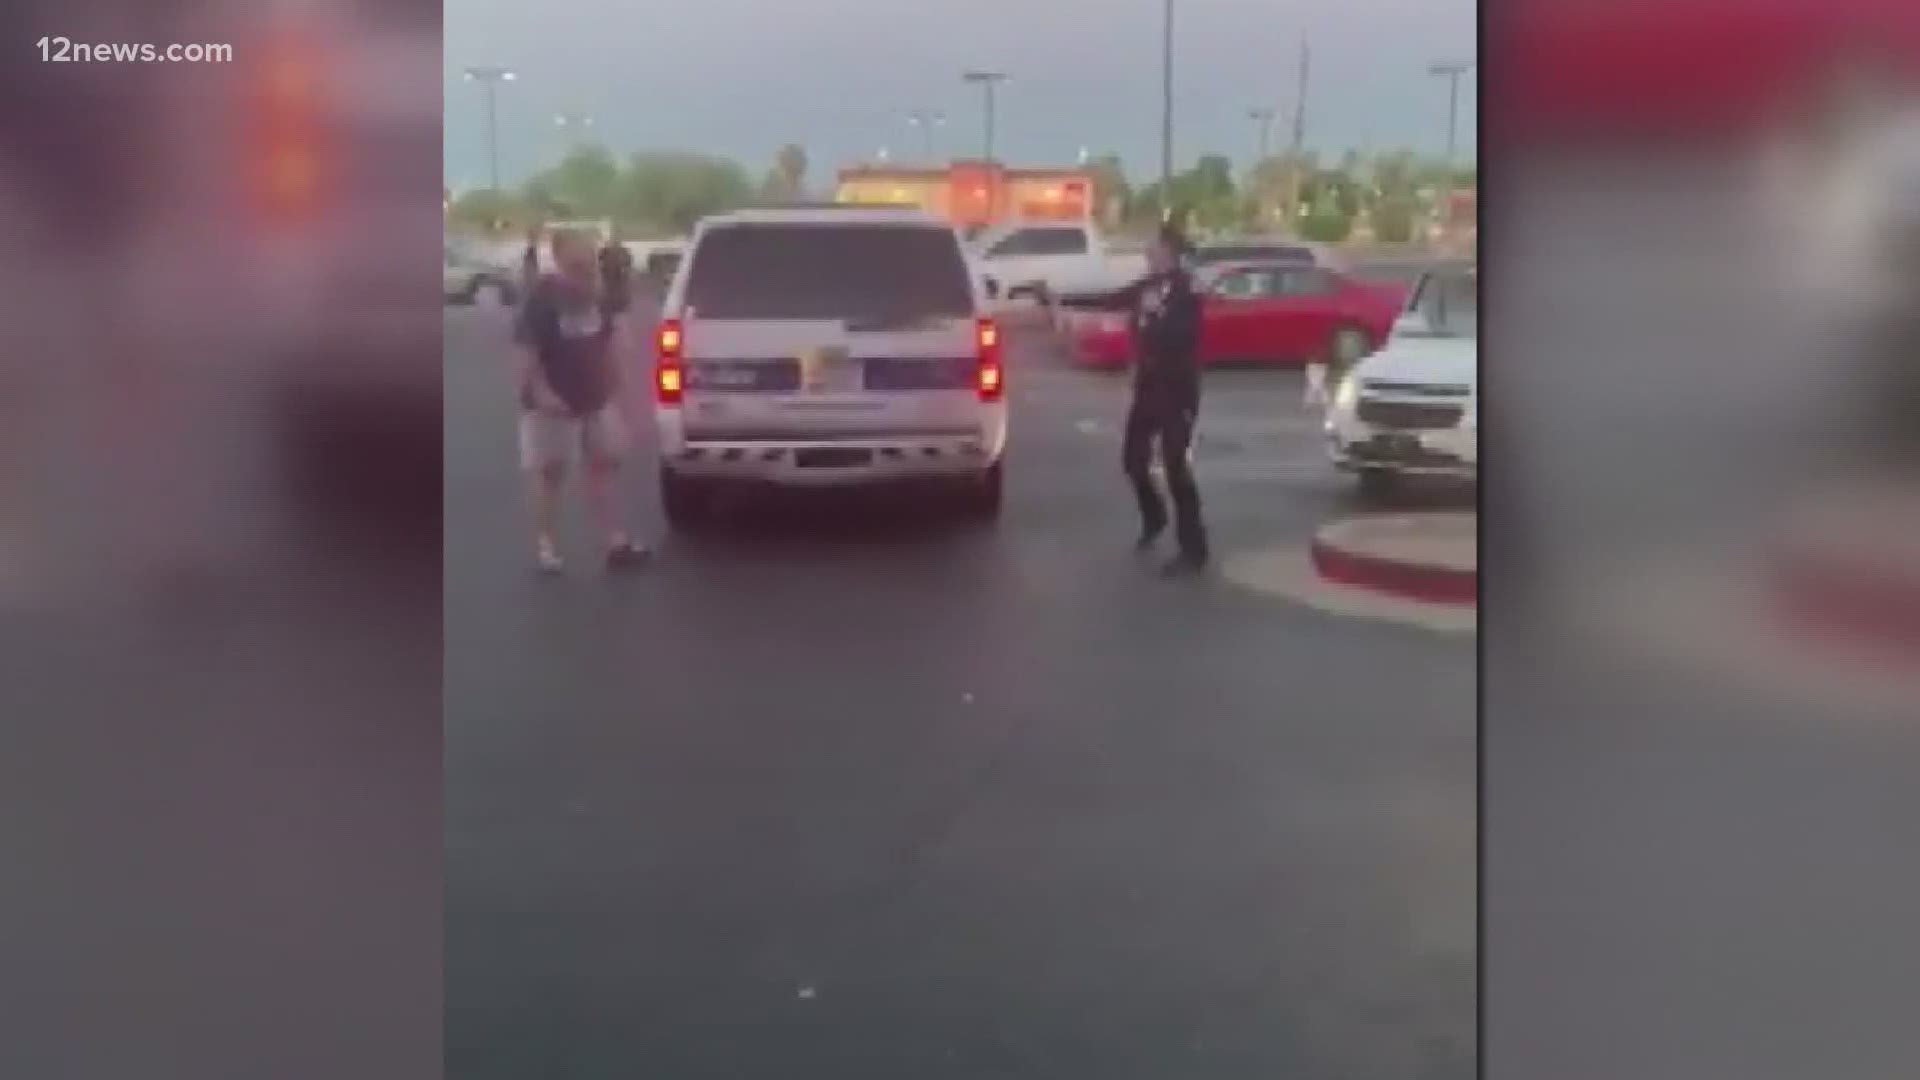 A video shared by Phoenix City Councilman Sal DiCiccio on social media shows a Phoenix officer backing up around her SUV as a man holding a knife moves towards her.